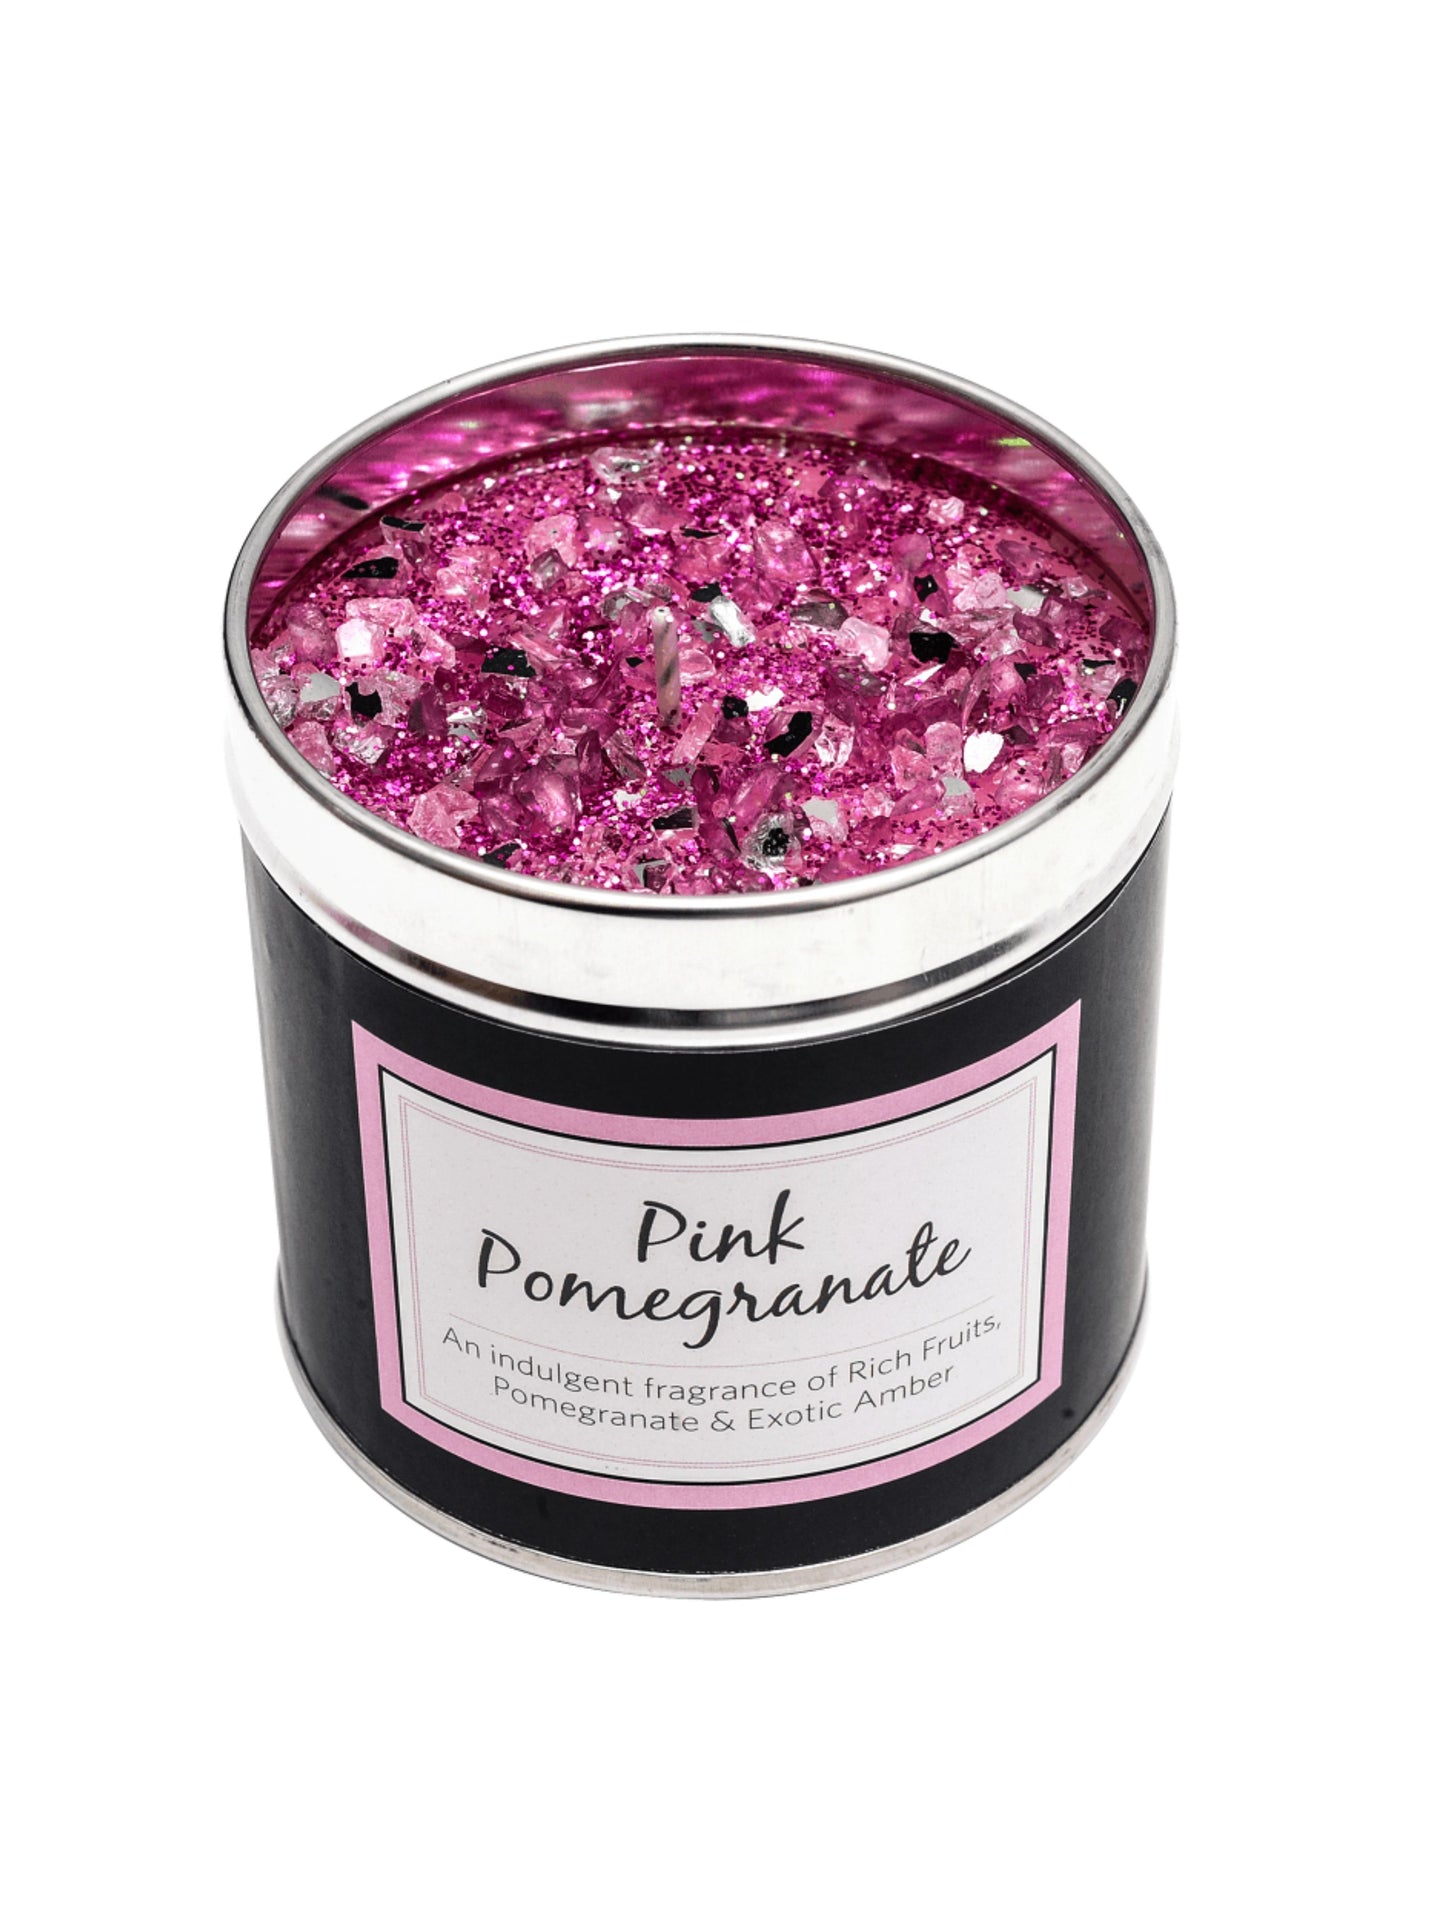 Seriously Scented Candle - Pink Pomegranate